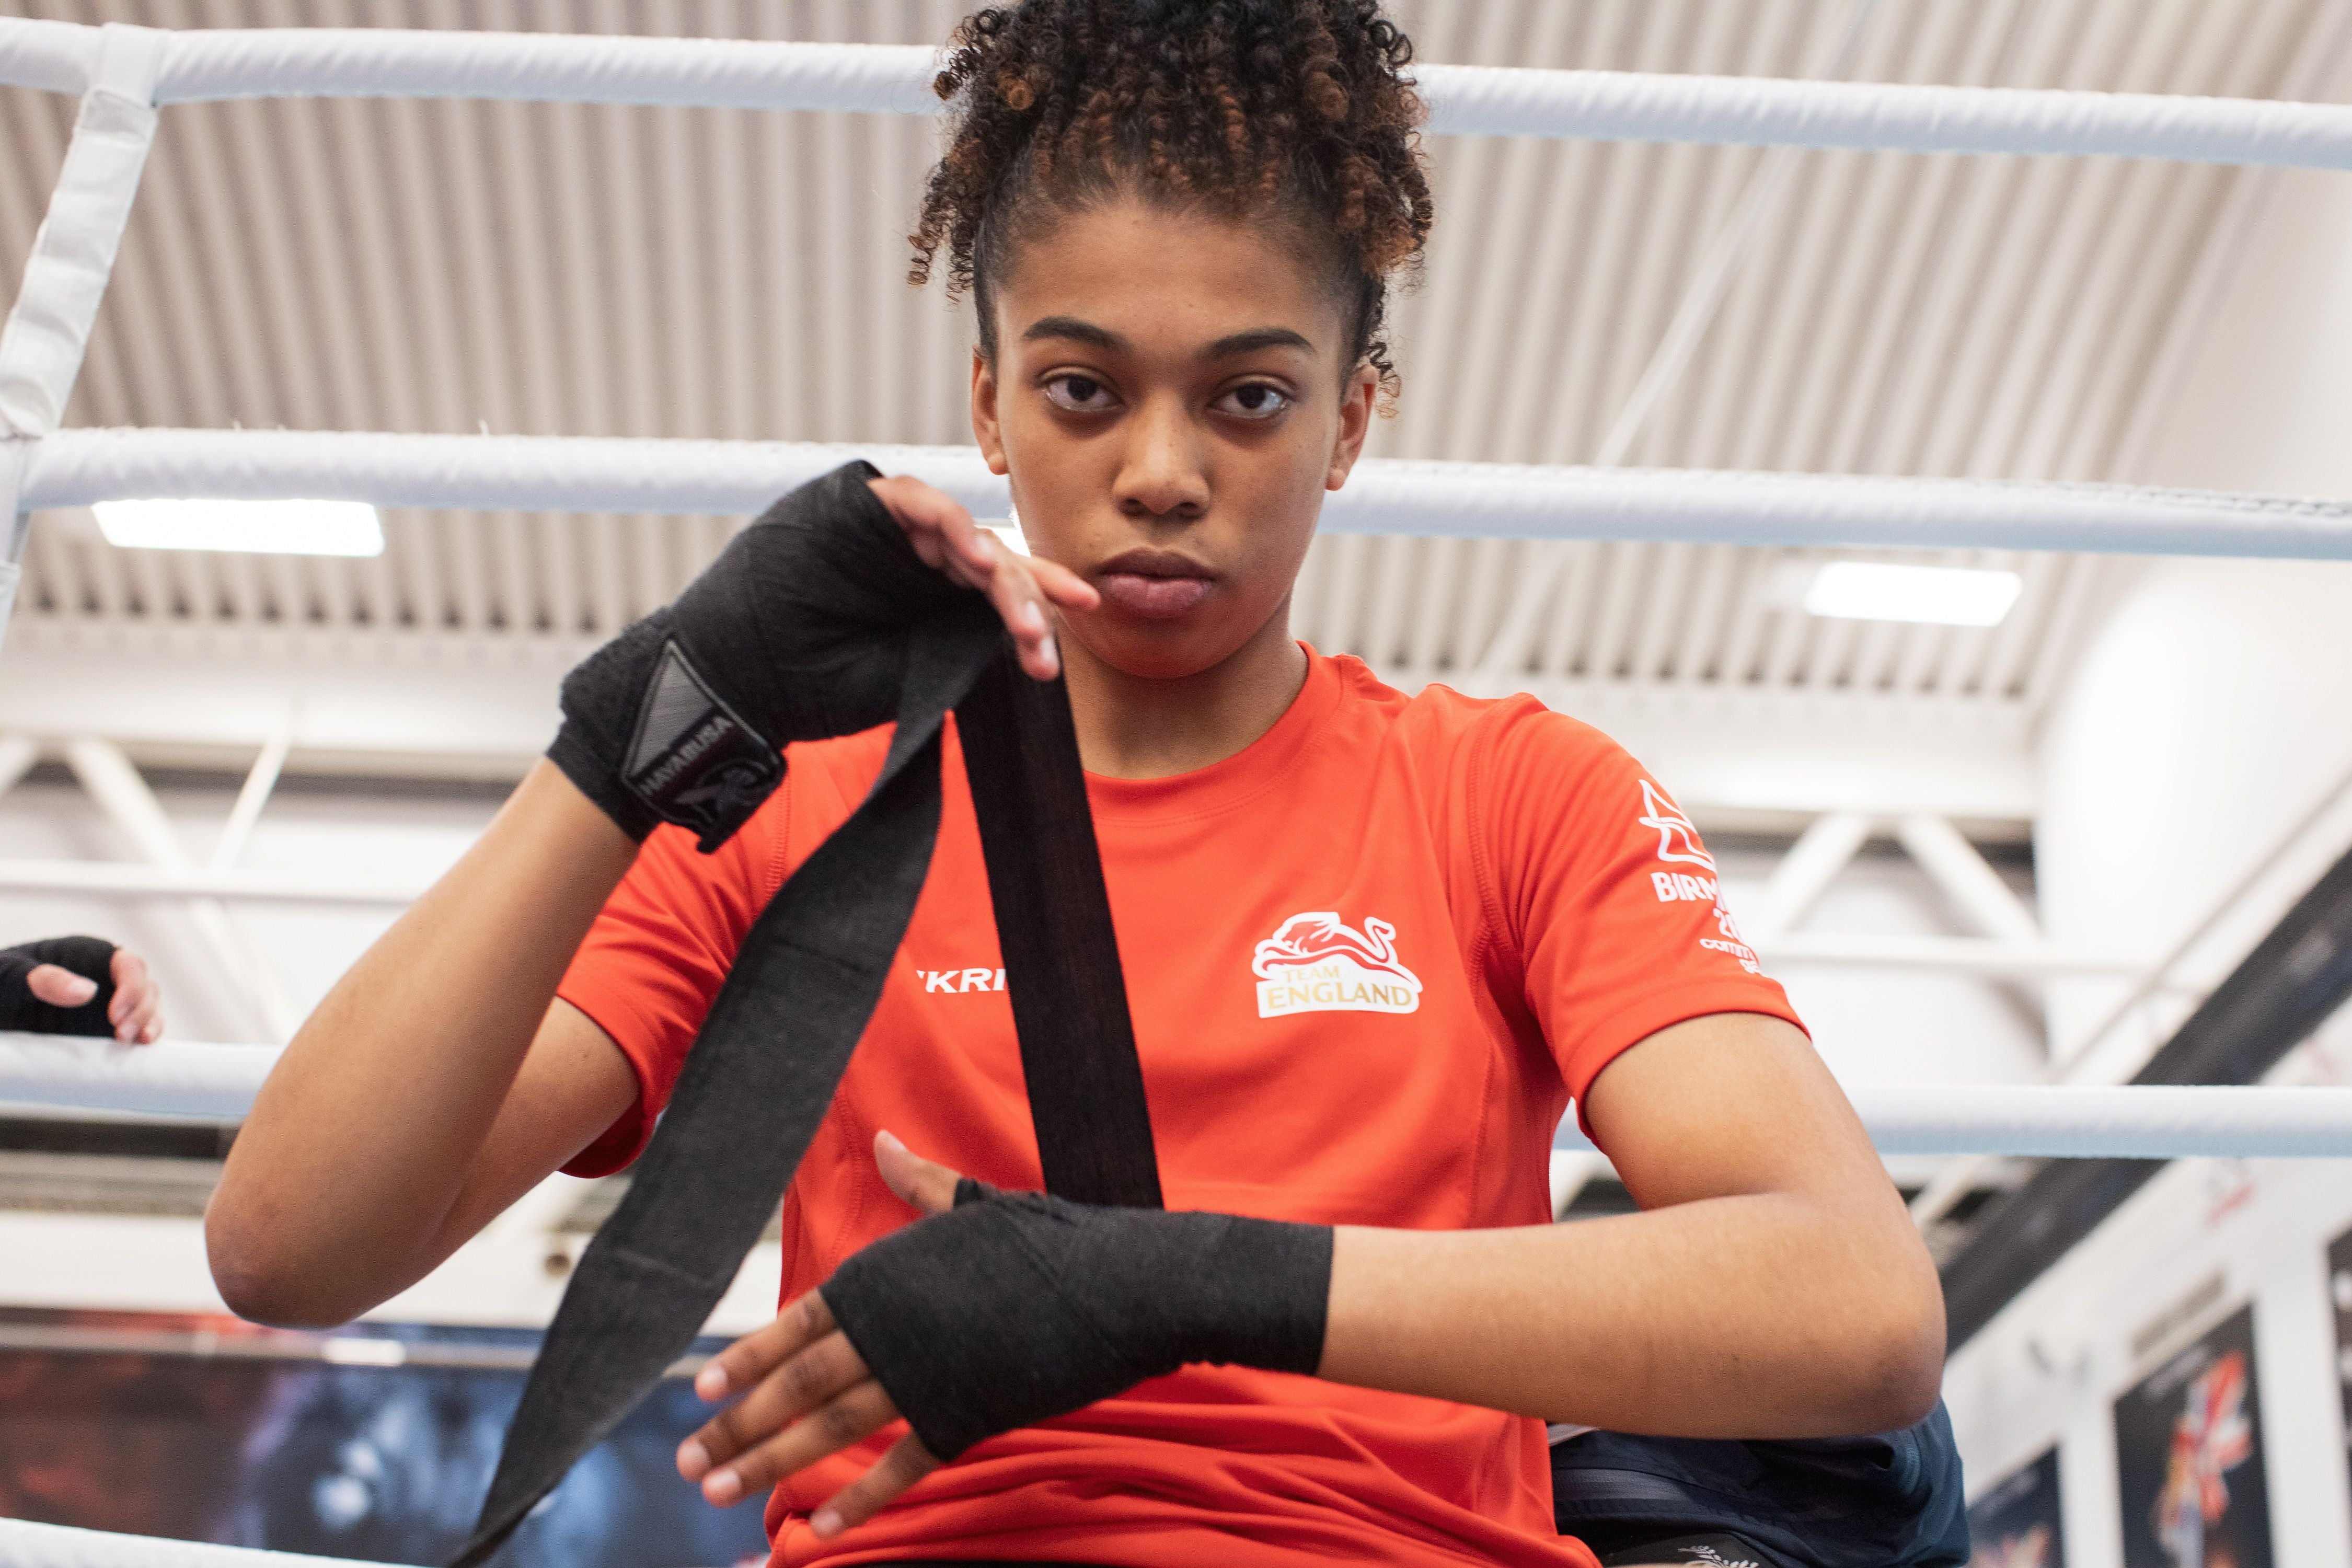 Sameenah Toussaint has risen from an inauspicious start to her boxing career (Team England/PA handout)